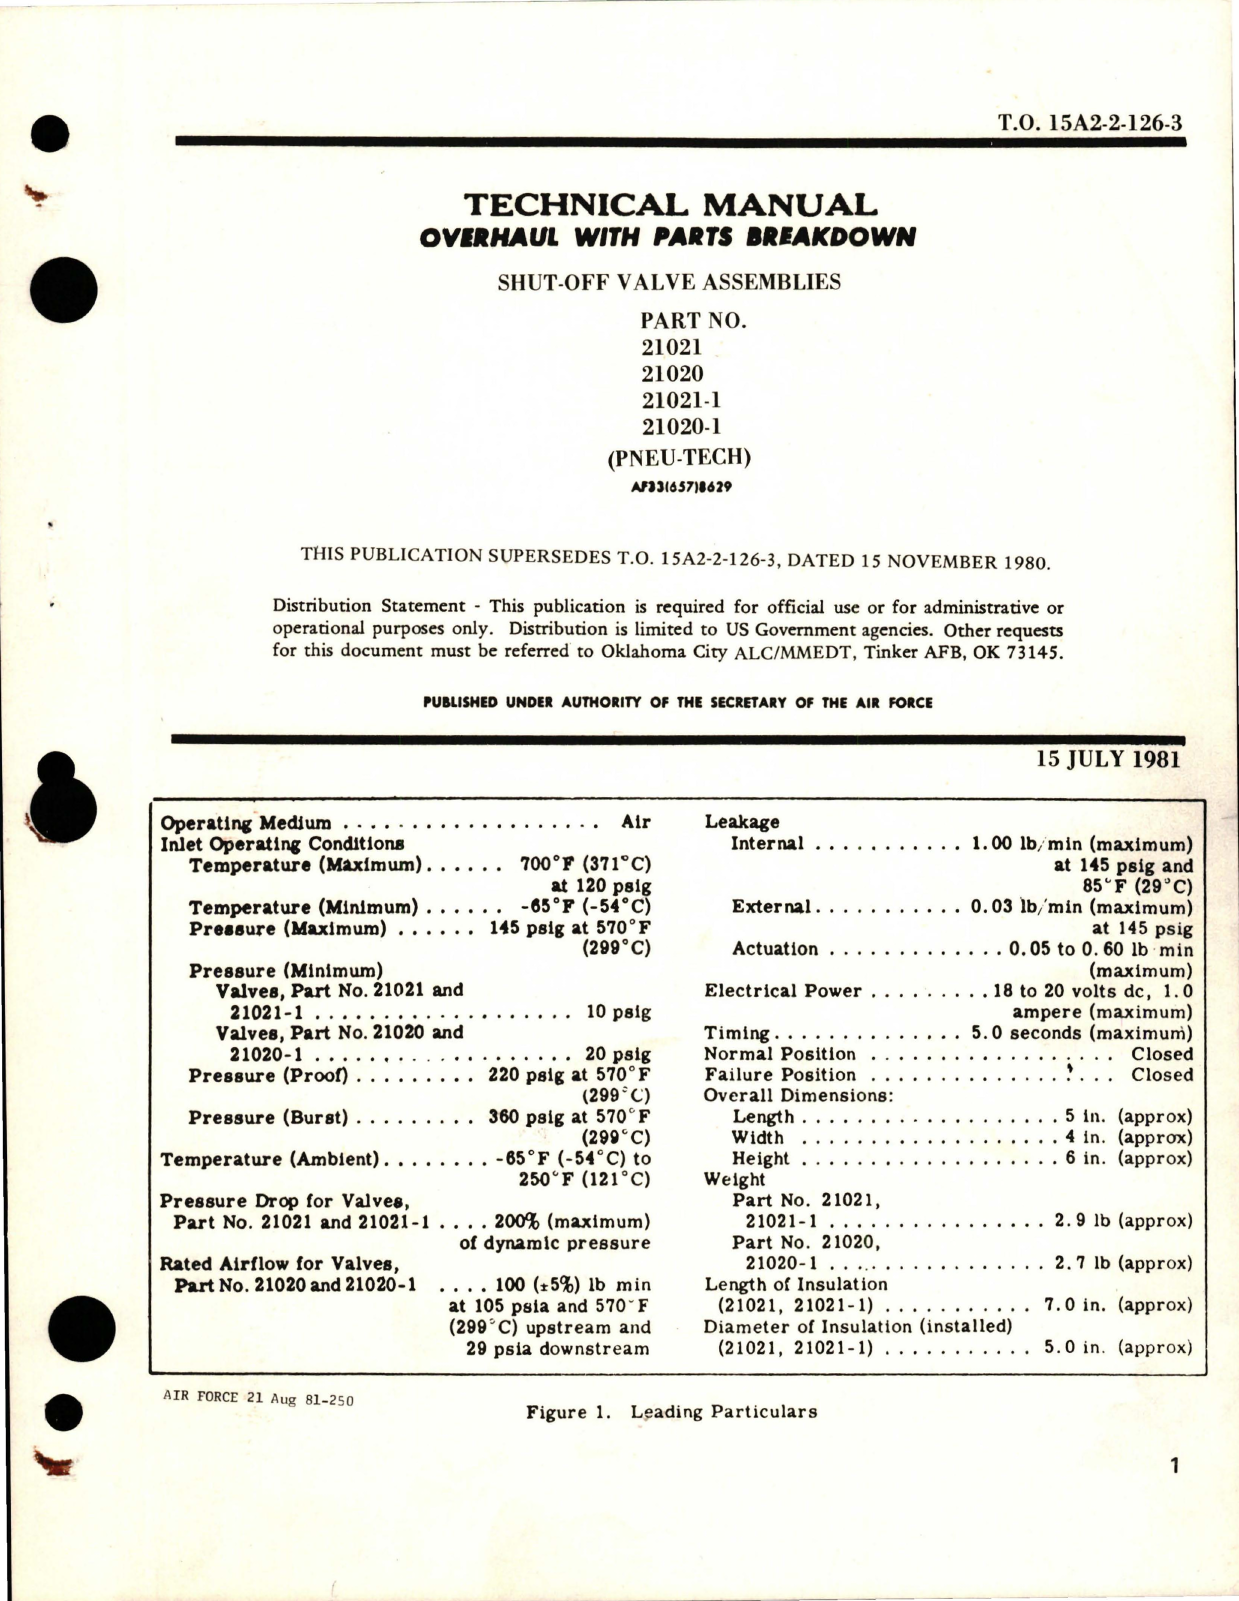 Sample page 1 from AirCorps Library document: Overhaul with Parts Breakdown for Shut Off Valve Assemblies - Parts 21021, 21020, 21021-1, 21020-1